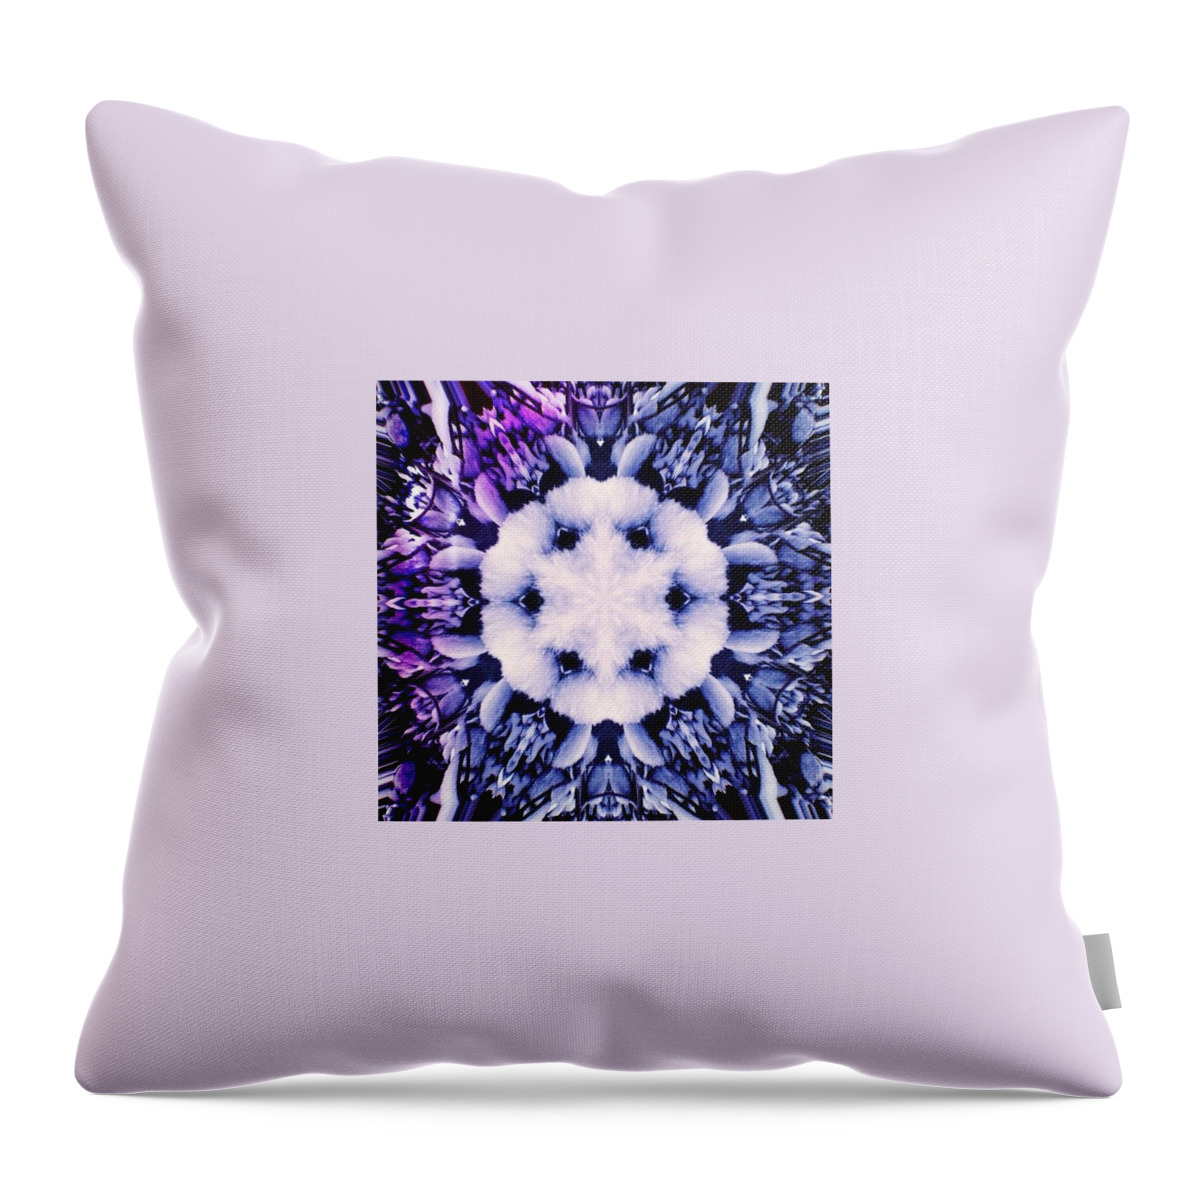 Mybest_edit Throw Pillow featuring the photograph Kaleidoscope Snow From My Digital Photo by Anna Porter